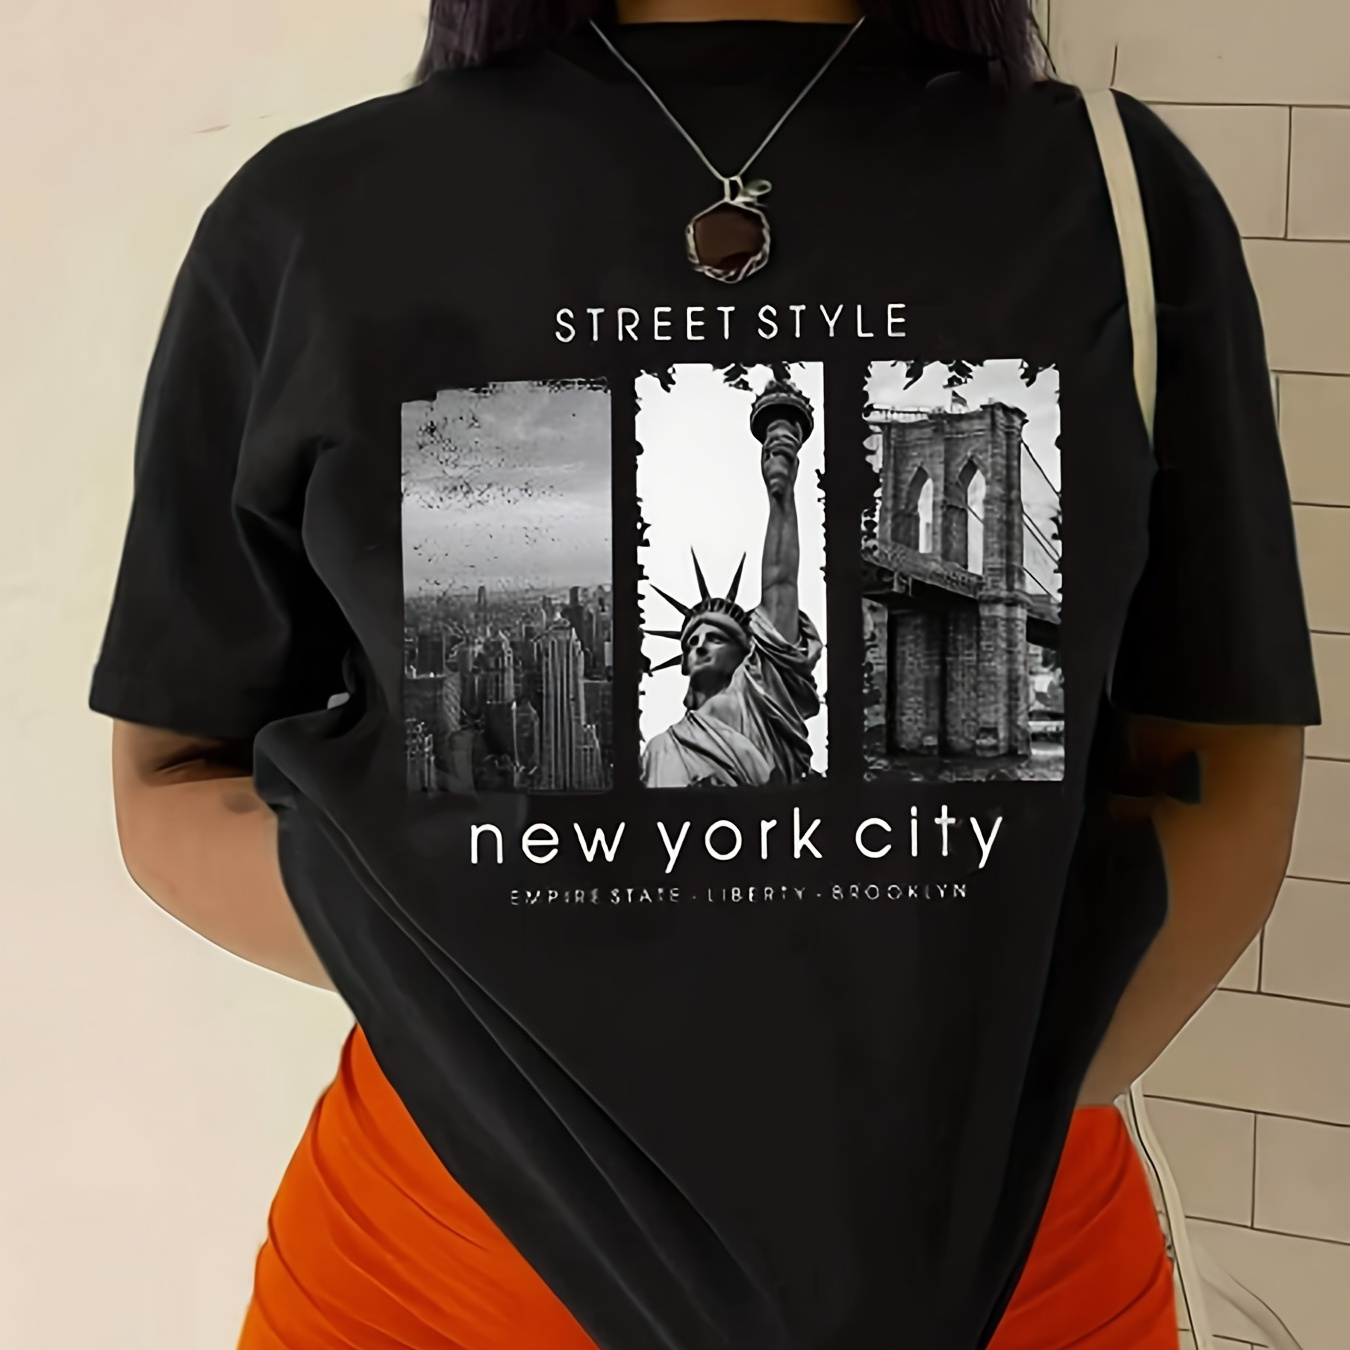 

New York Print Crew Neck T-shirt, Casual Short Sleeve Top For Spring & Summer, Women's Clothing